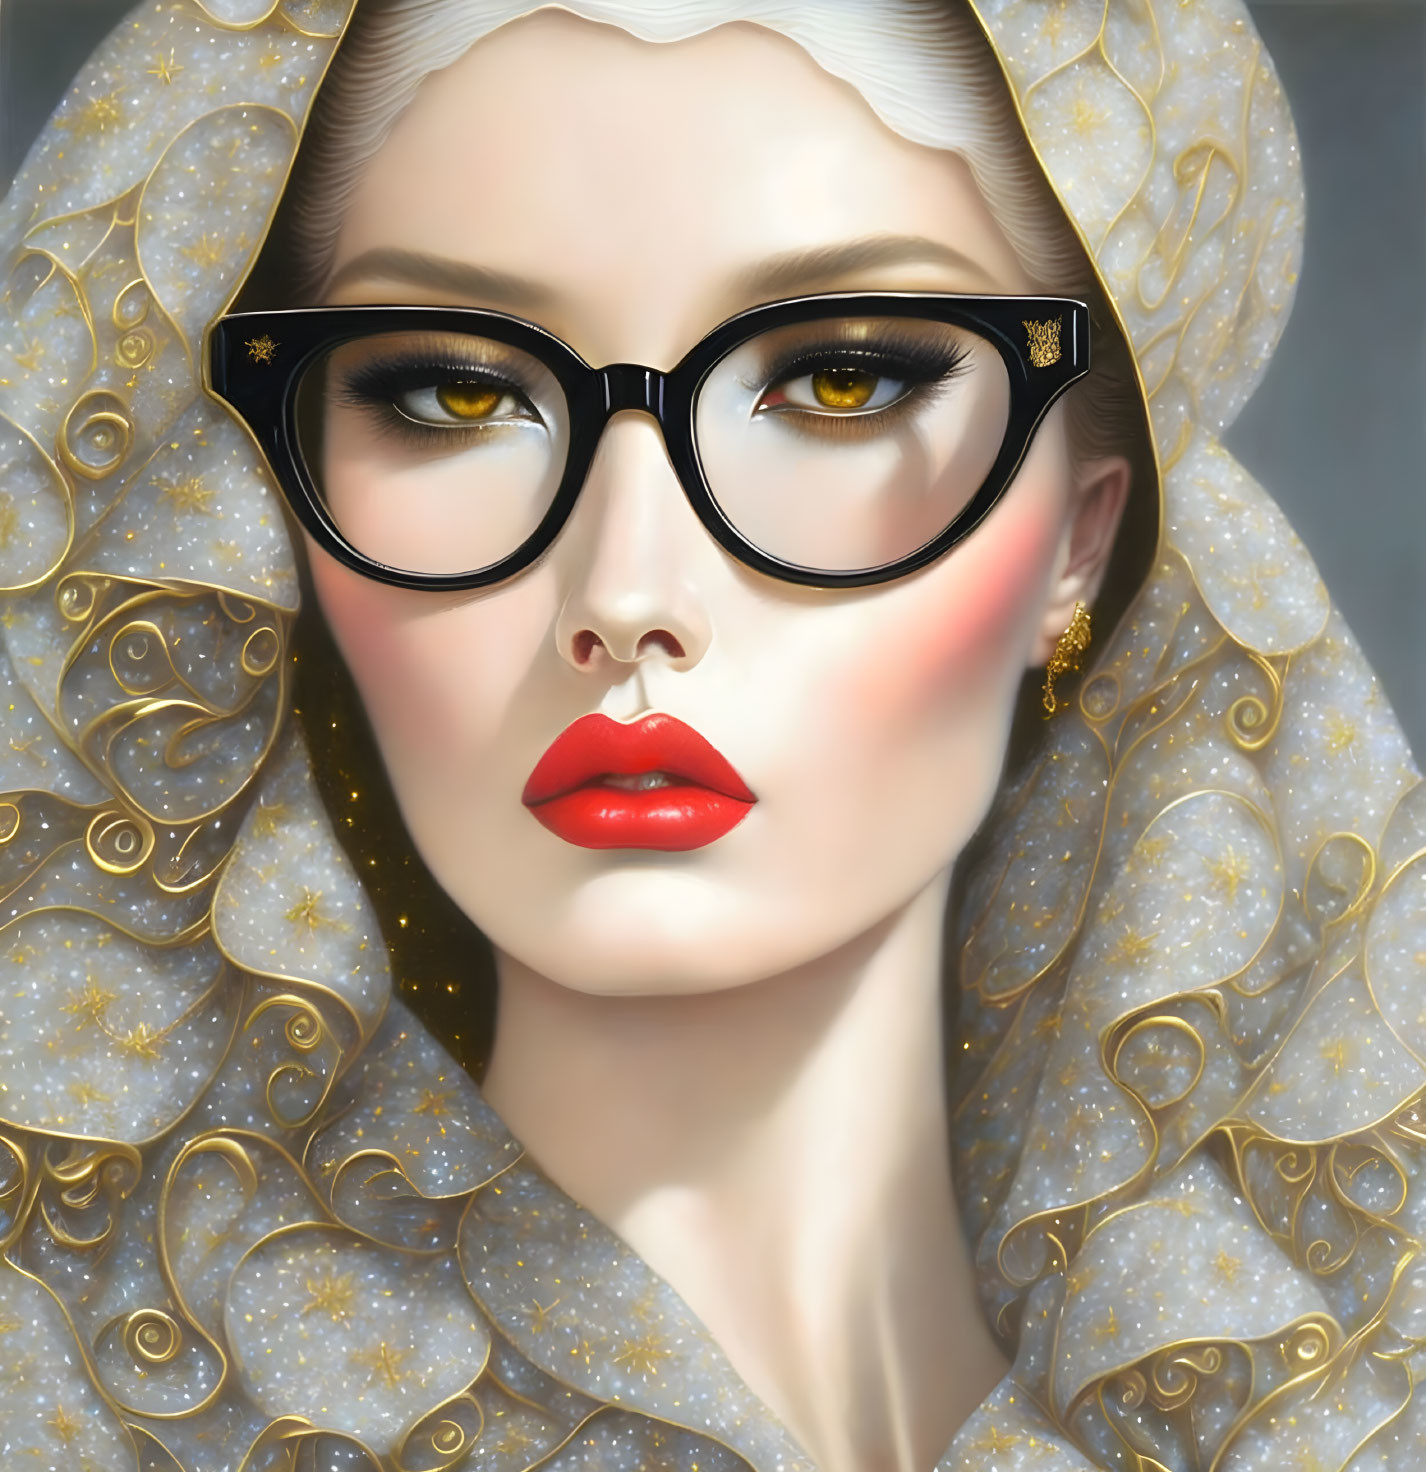 Illustrated portrait of woman with fair skin and red lips in black cat-eye glasses, adorned with golden